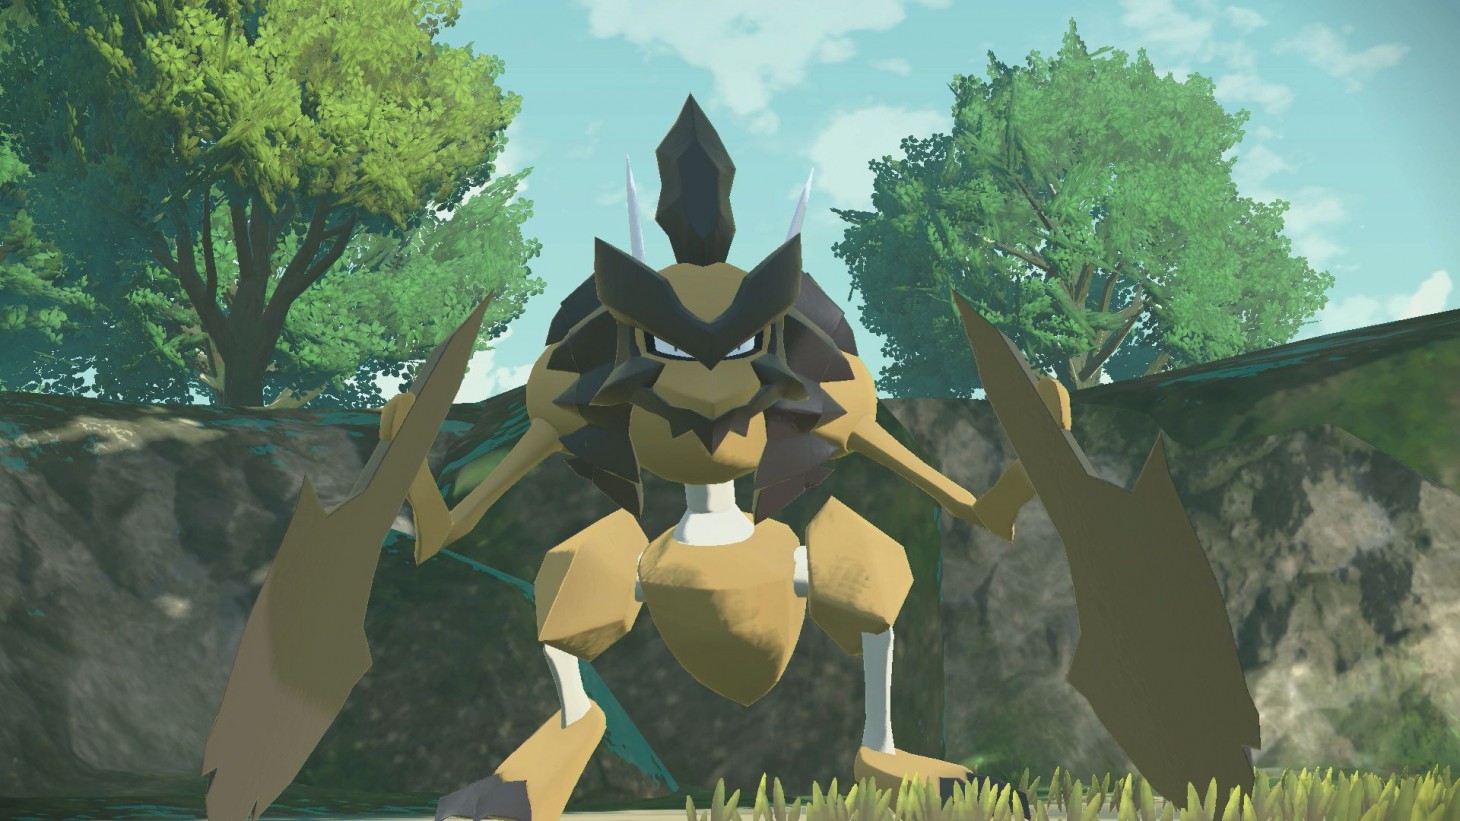 10 Game Mechanics We Could See In Pokemon Legends: Arceus